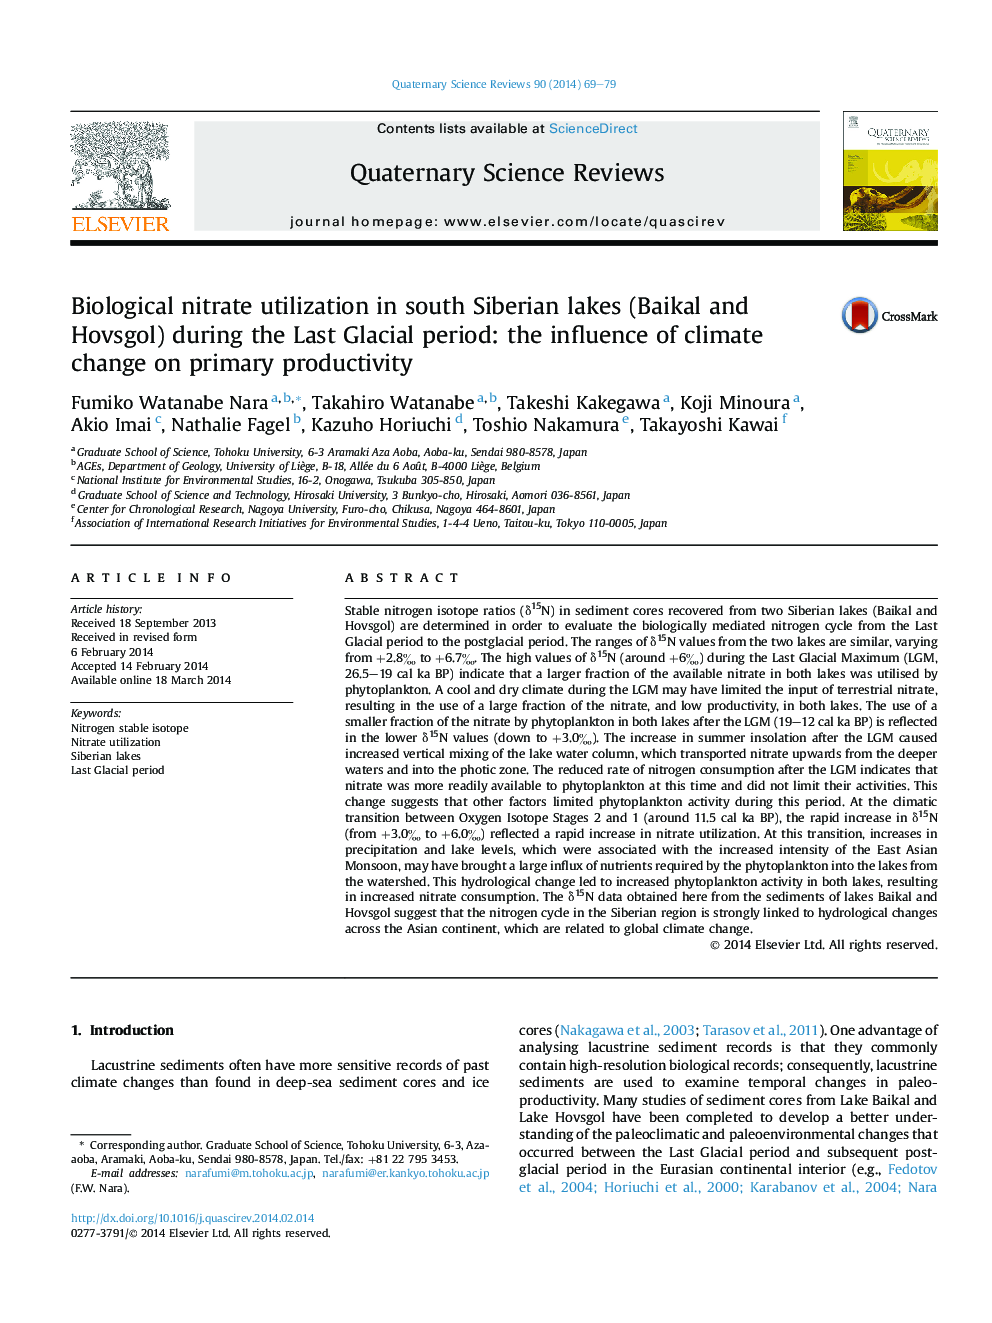 Biological nitrate utilization in south Siberian lakes (Baikal and Hovsgol) during the Last Glacial period: the influence of climate change on primary productivity